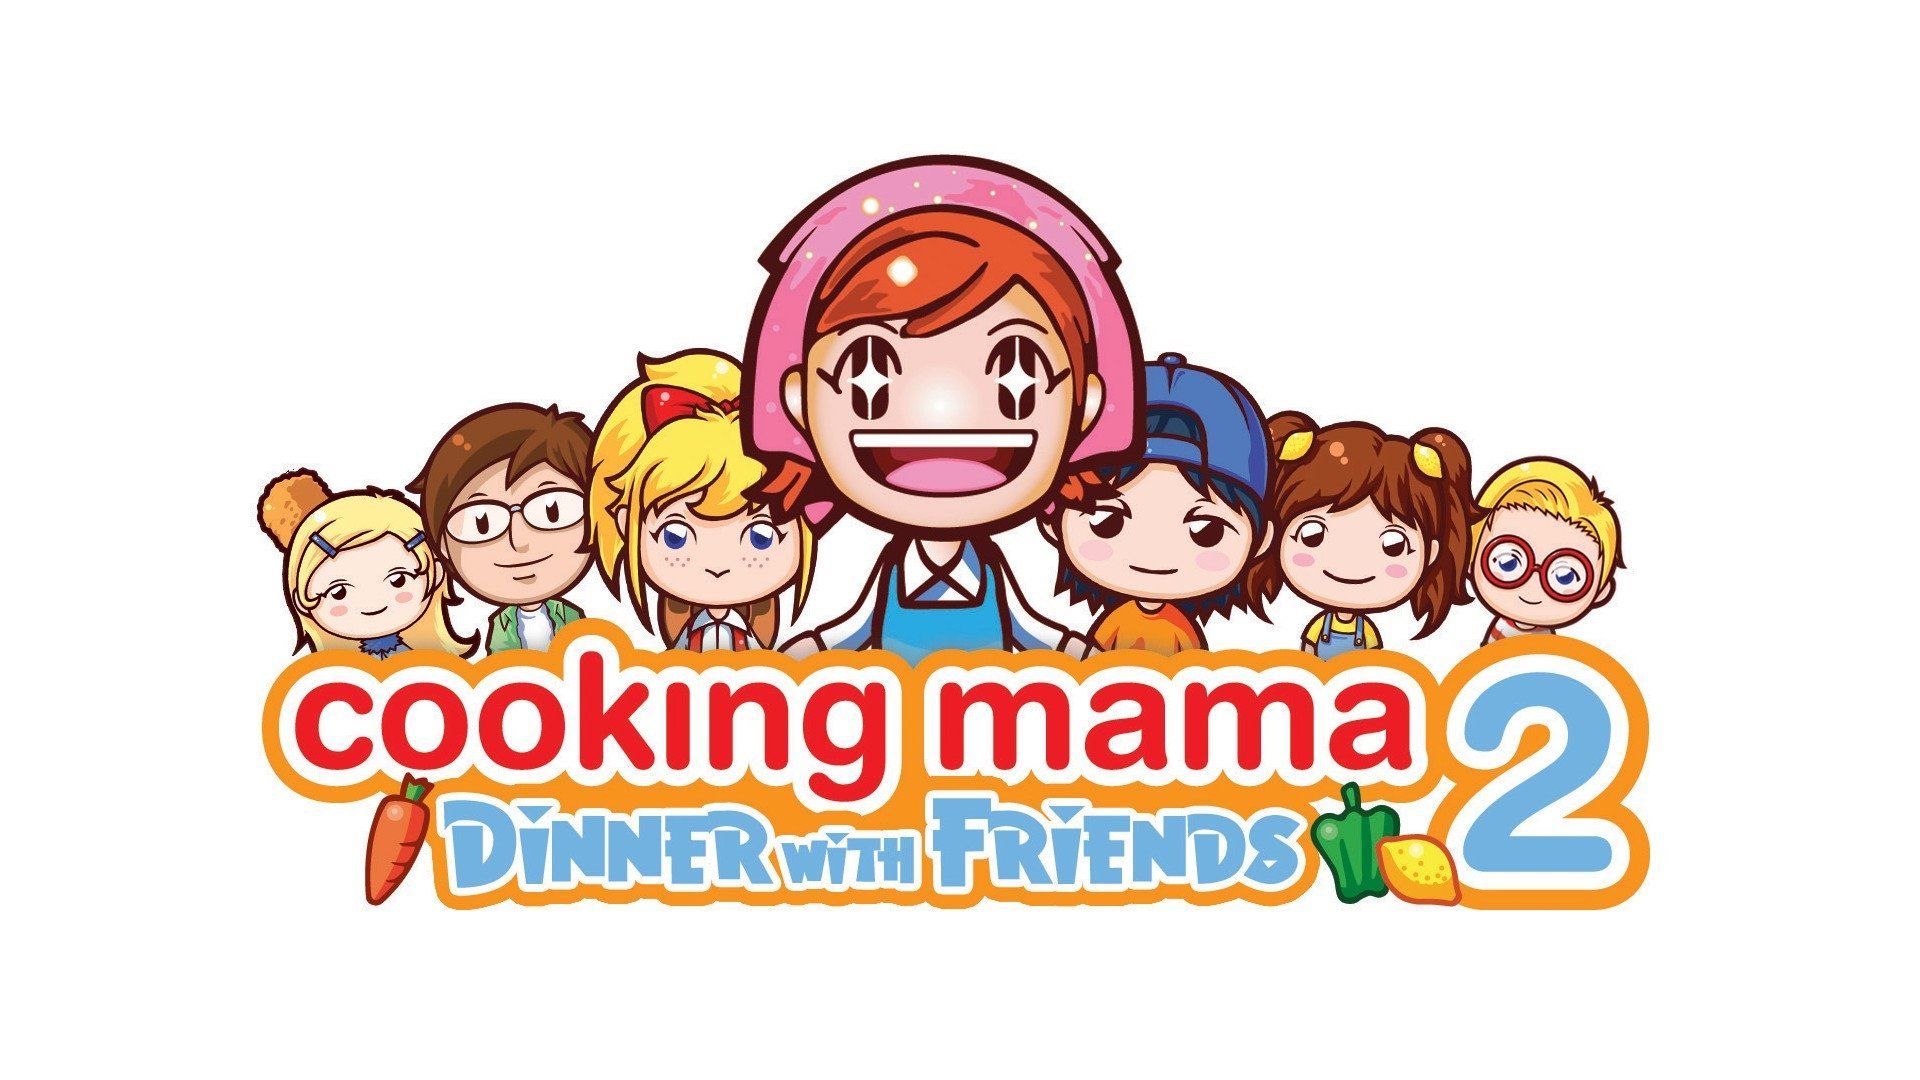 Mam 2. Cooking mama 2 dinner with friends. Cooking mama. Cooking mama dinner with friends. Cooking mama Art.